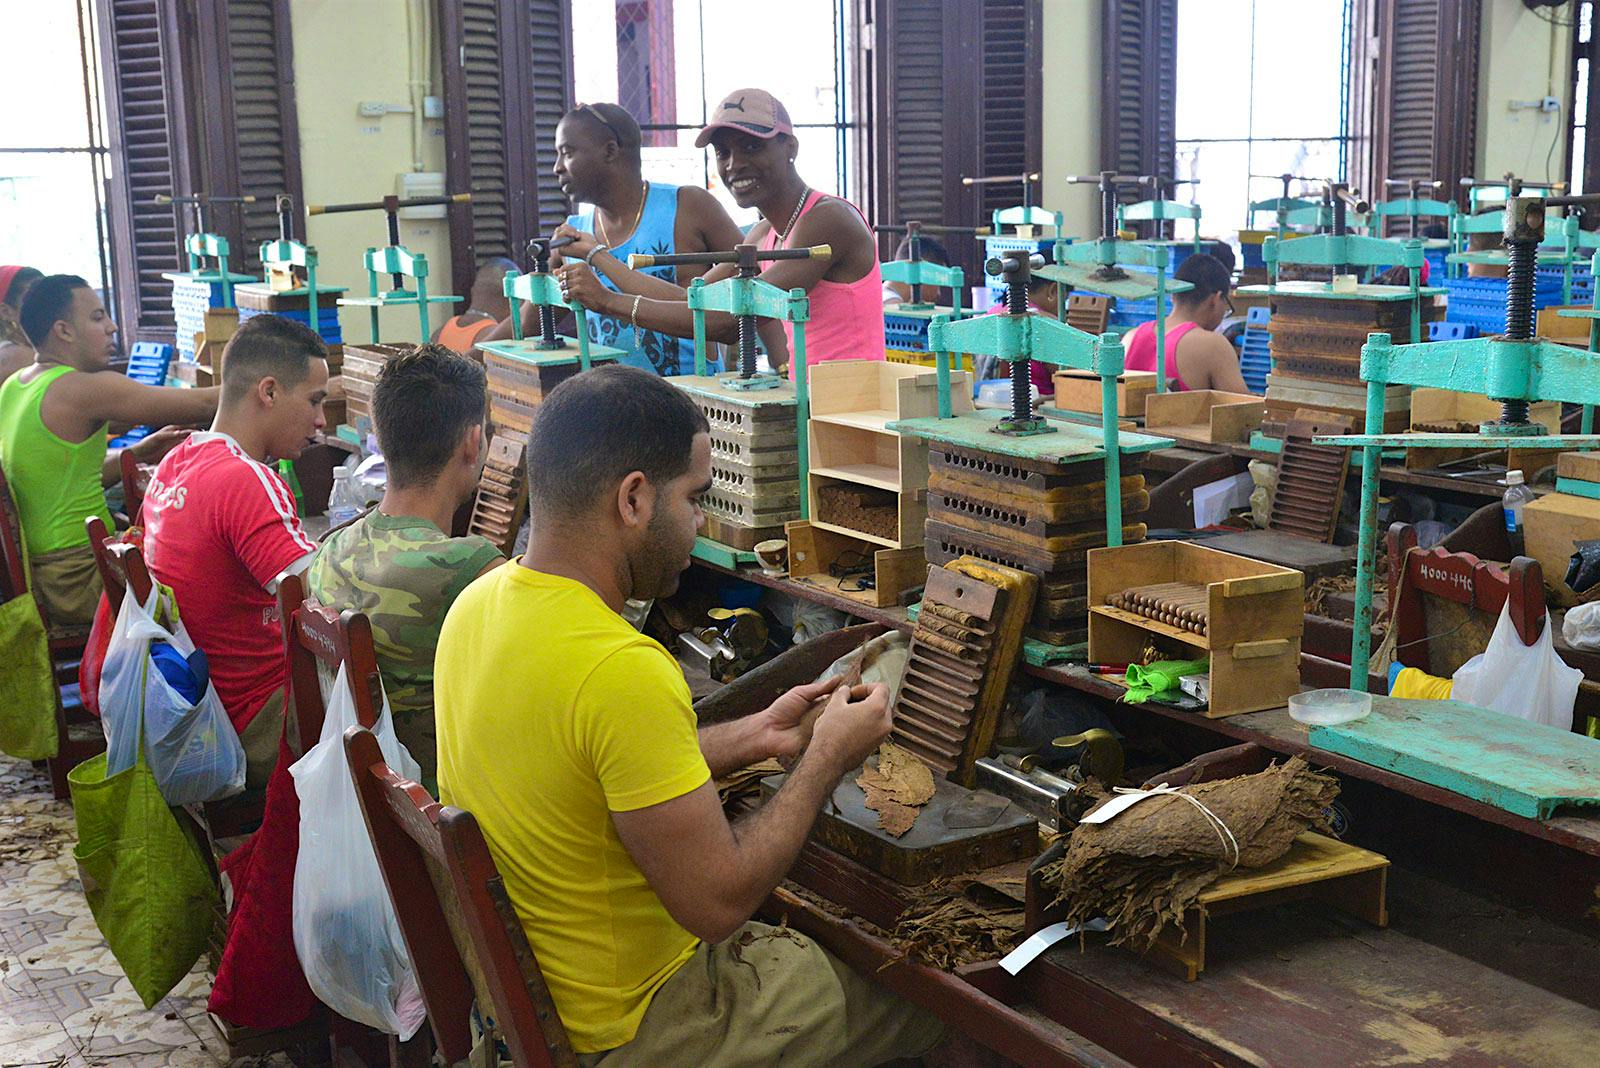 Though Habanos operates a number of factories throughout Cuba, this year, the U. Upmann factory was the only facility open to the tour.